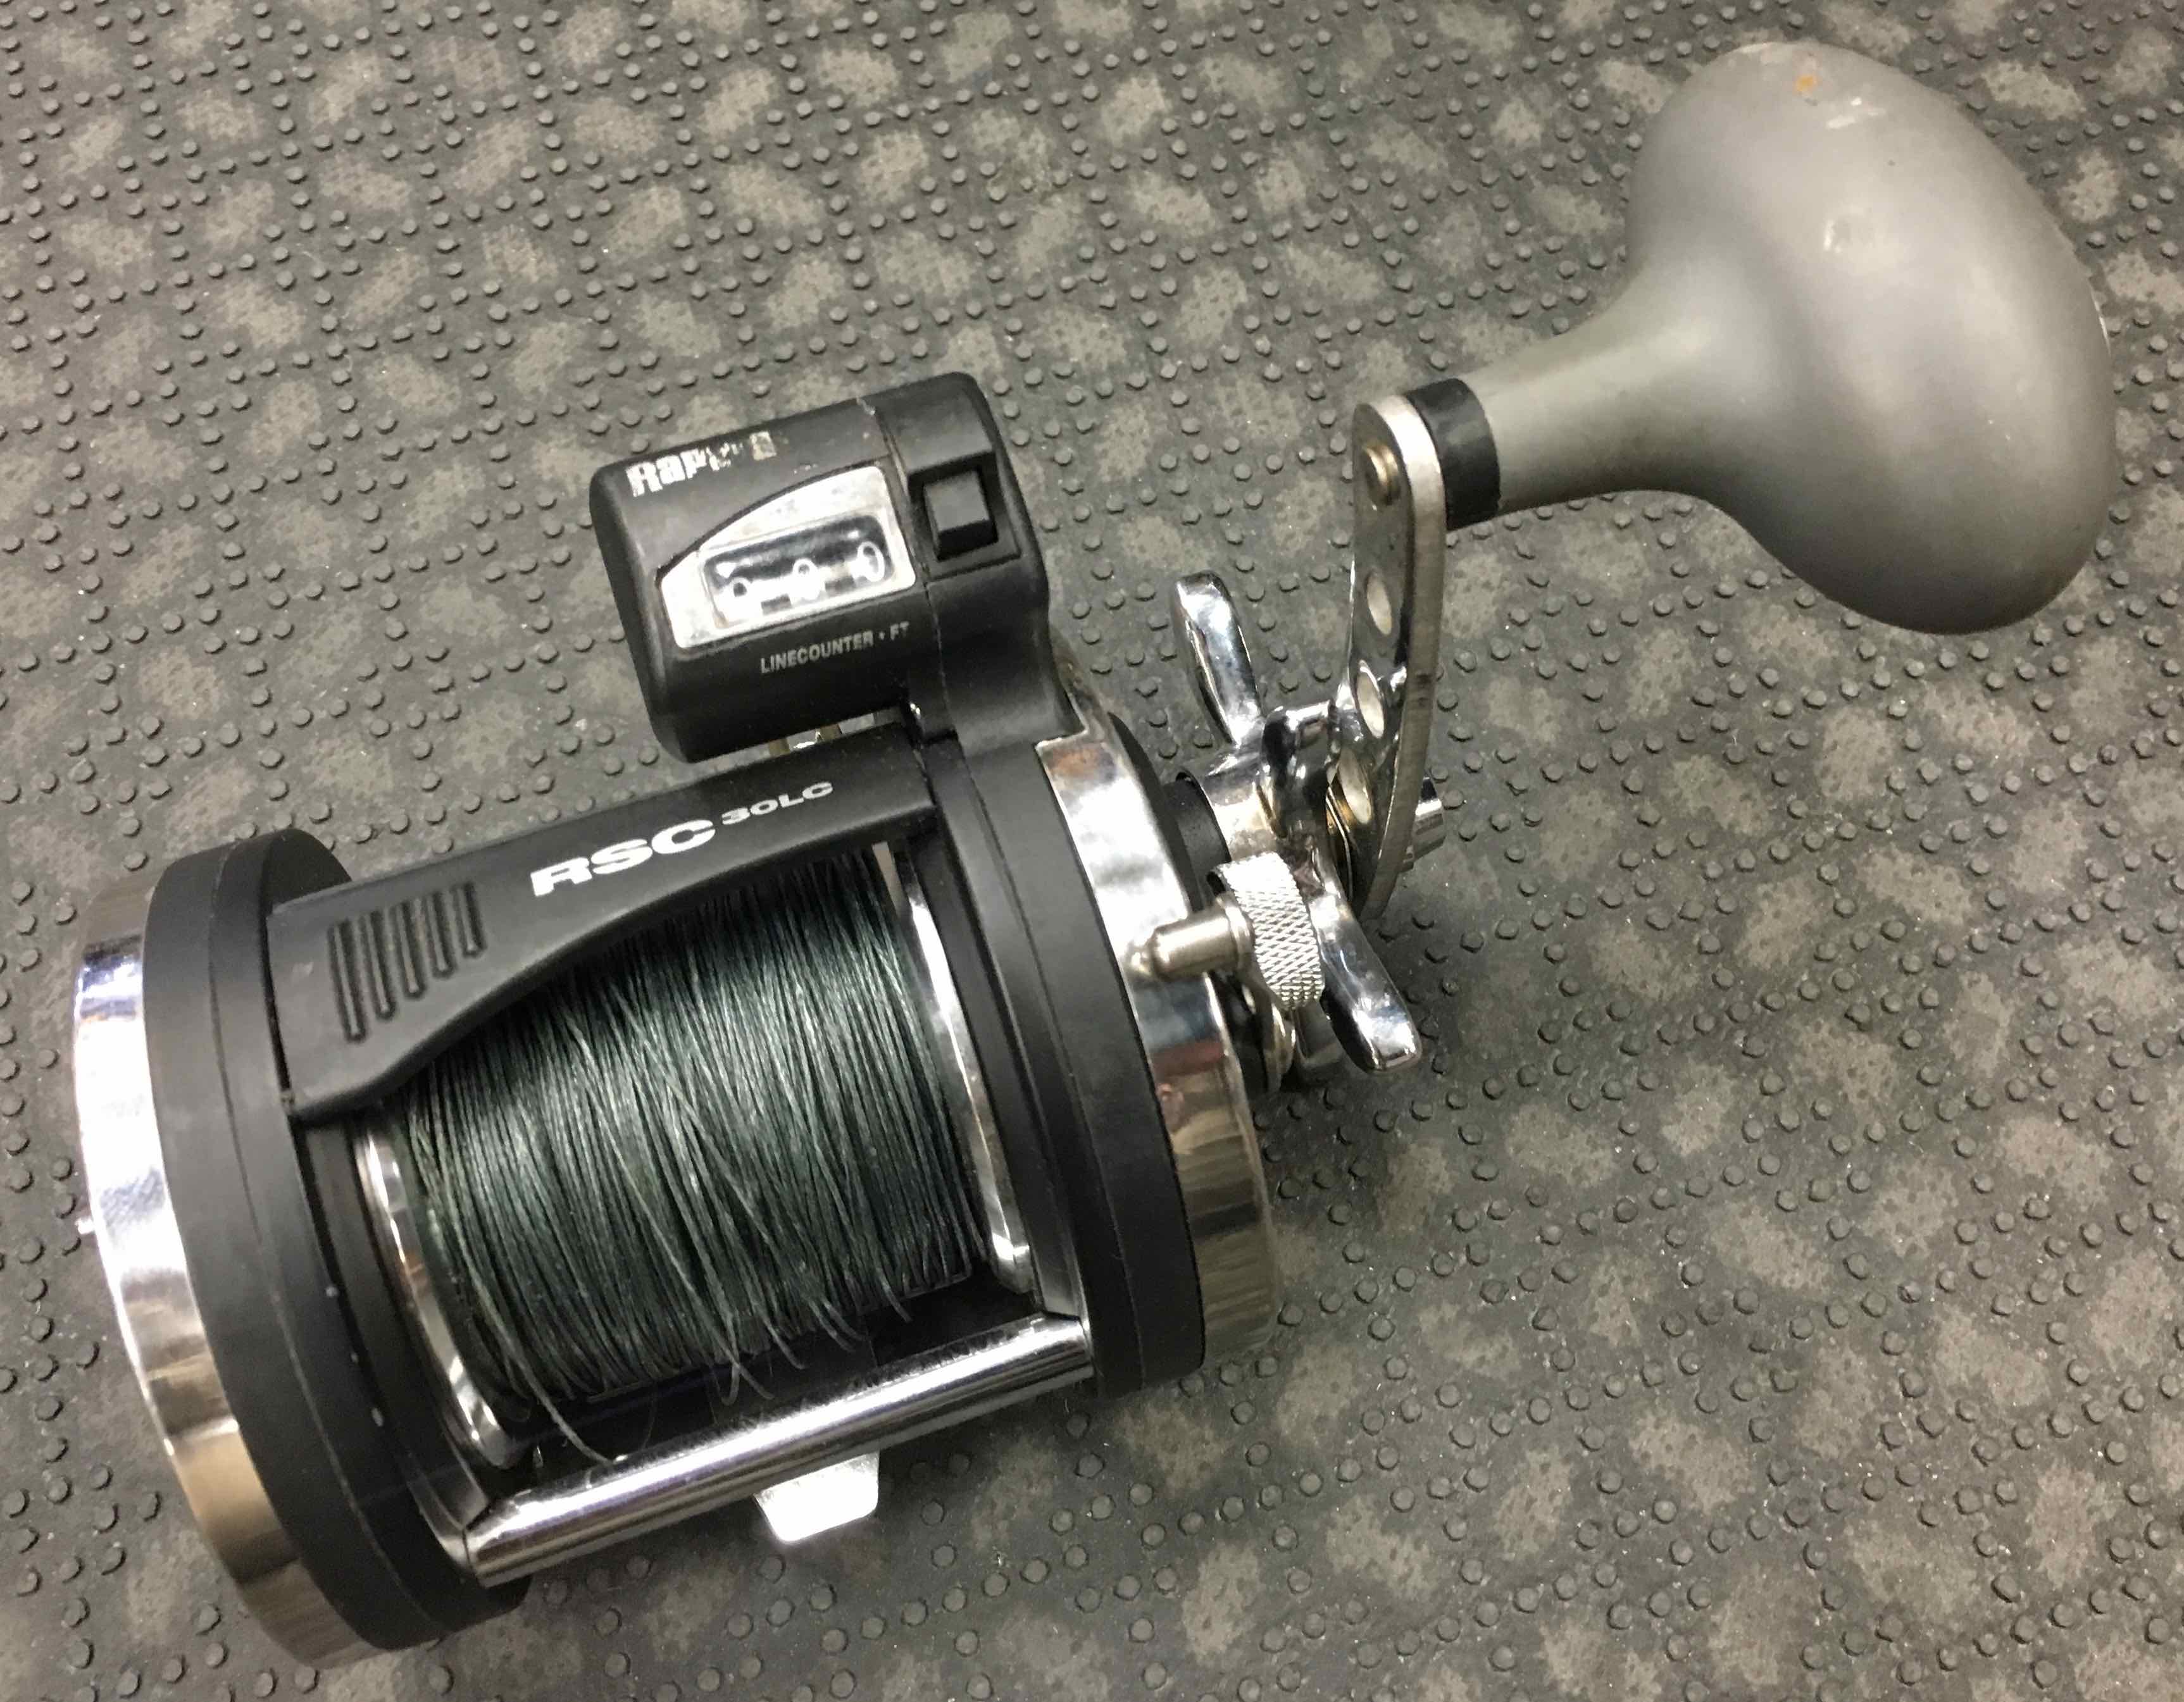 SOLD! – Rapala – RSC 30LG – Line Counter Downrigging Reel c/w Braid – $40 –  The First Cast – Hook, Line and Sinker's Fly Fishing Shop